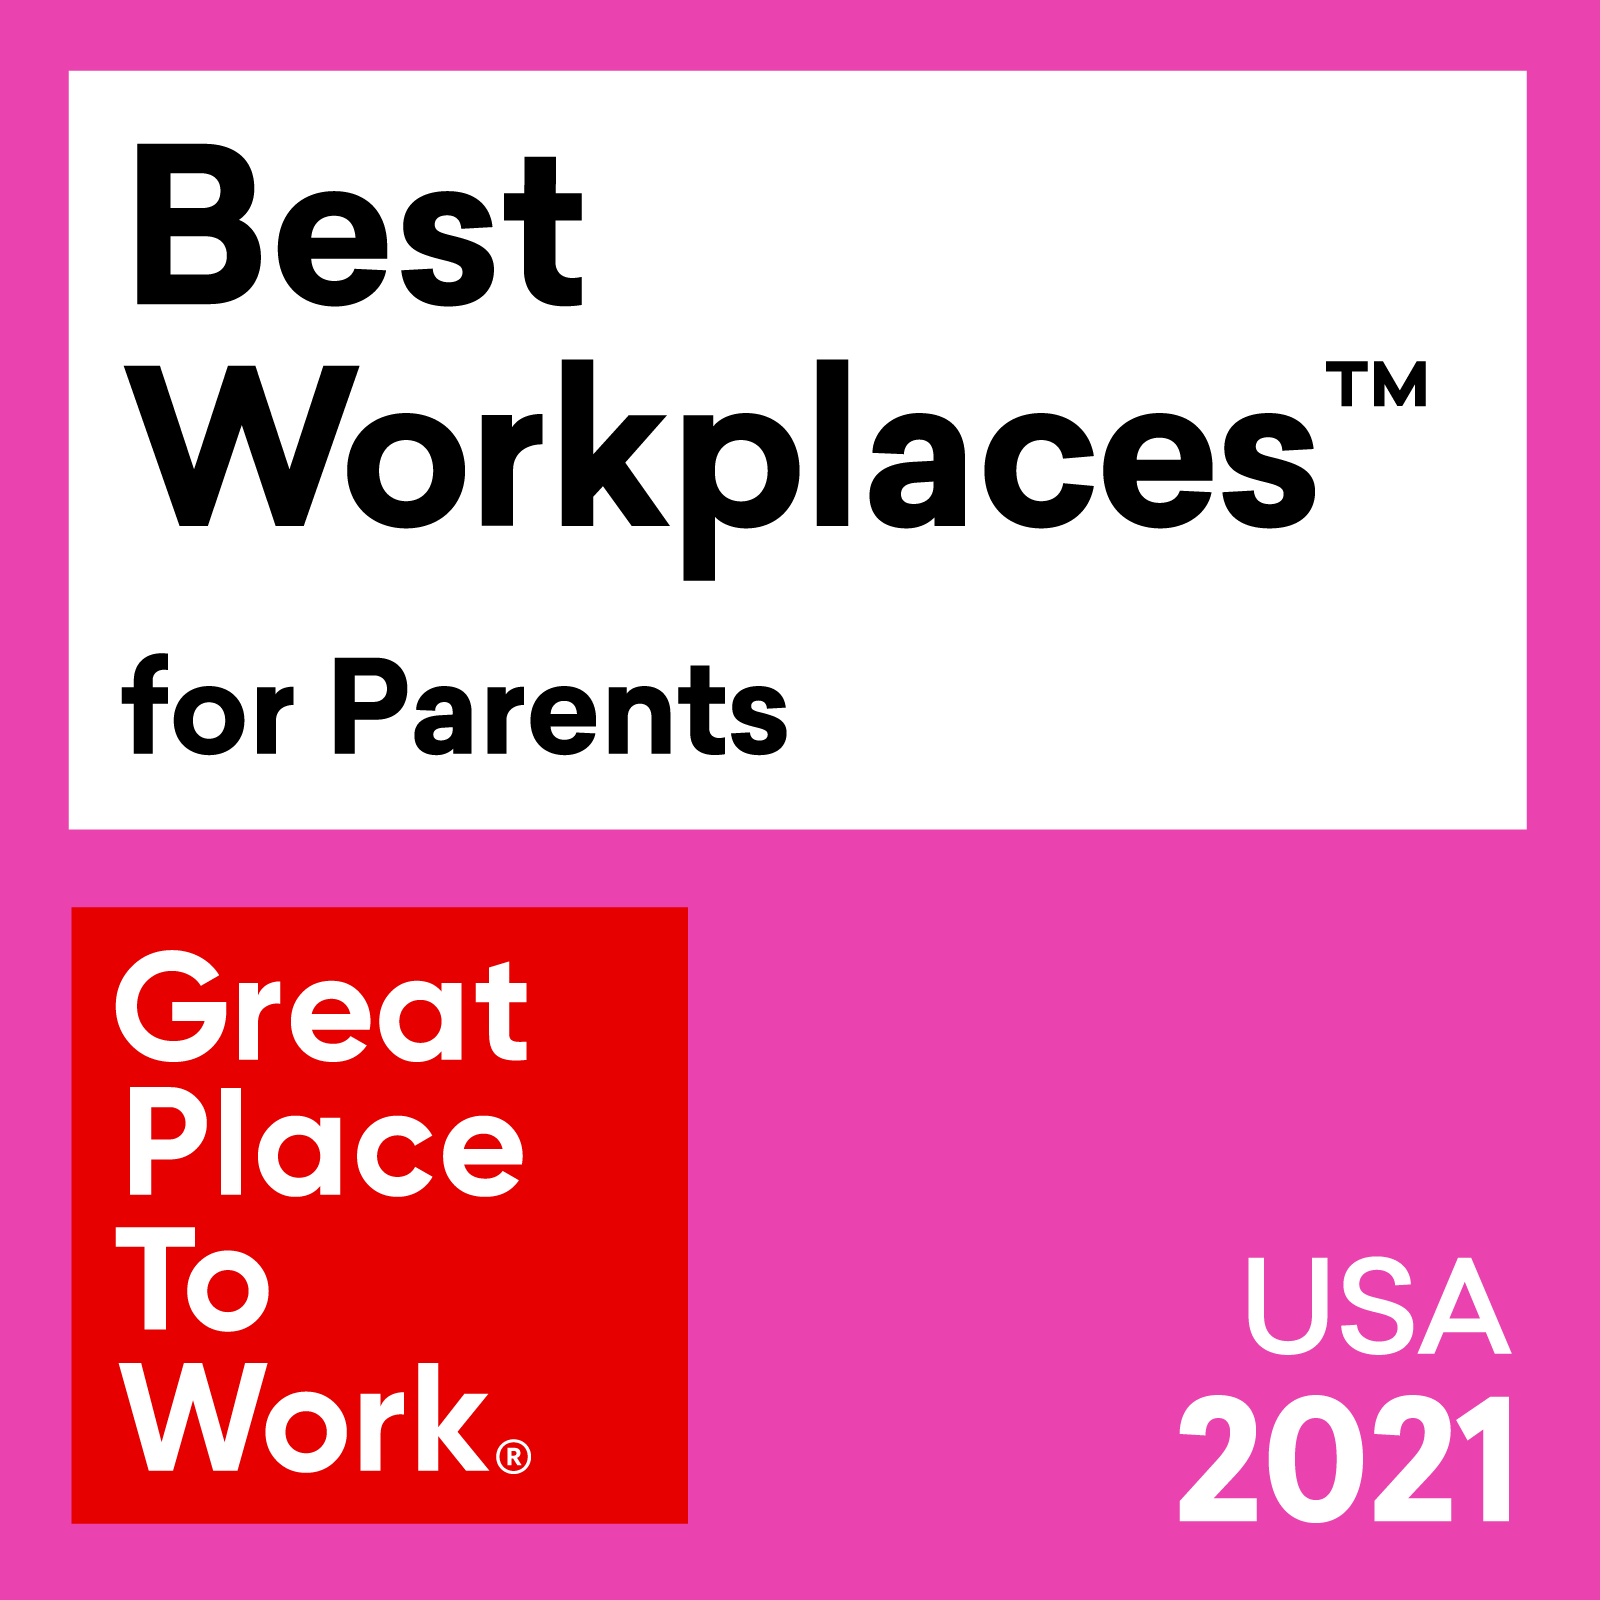 2021 USA Best Workplaces for Parents